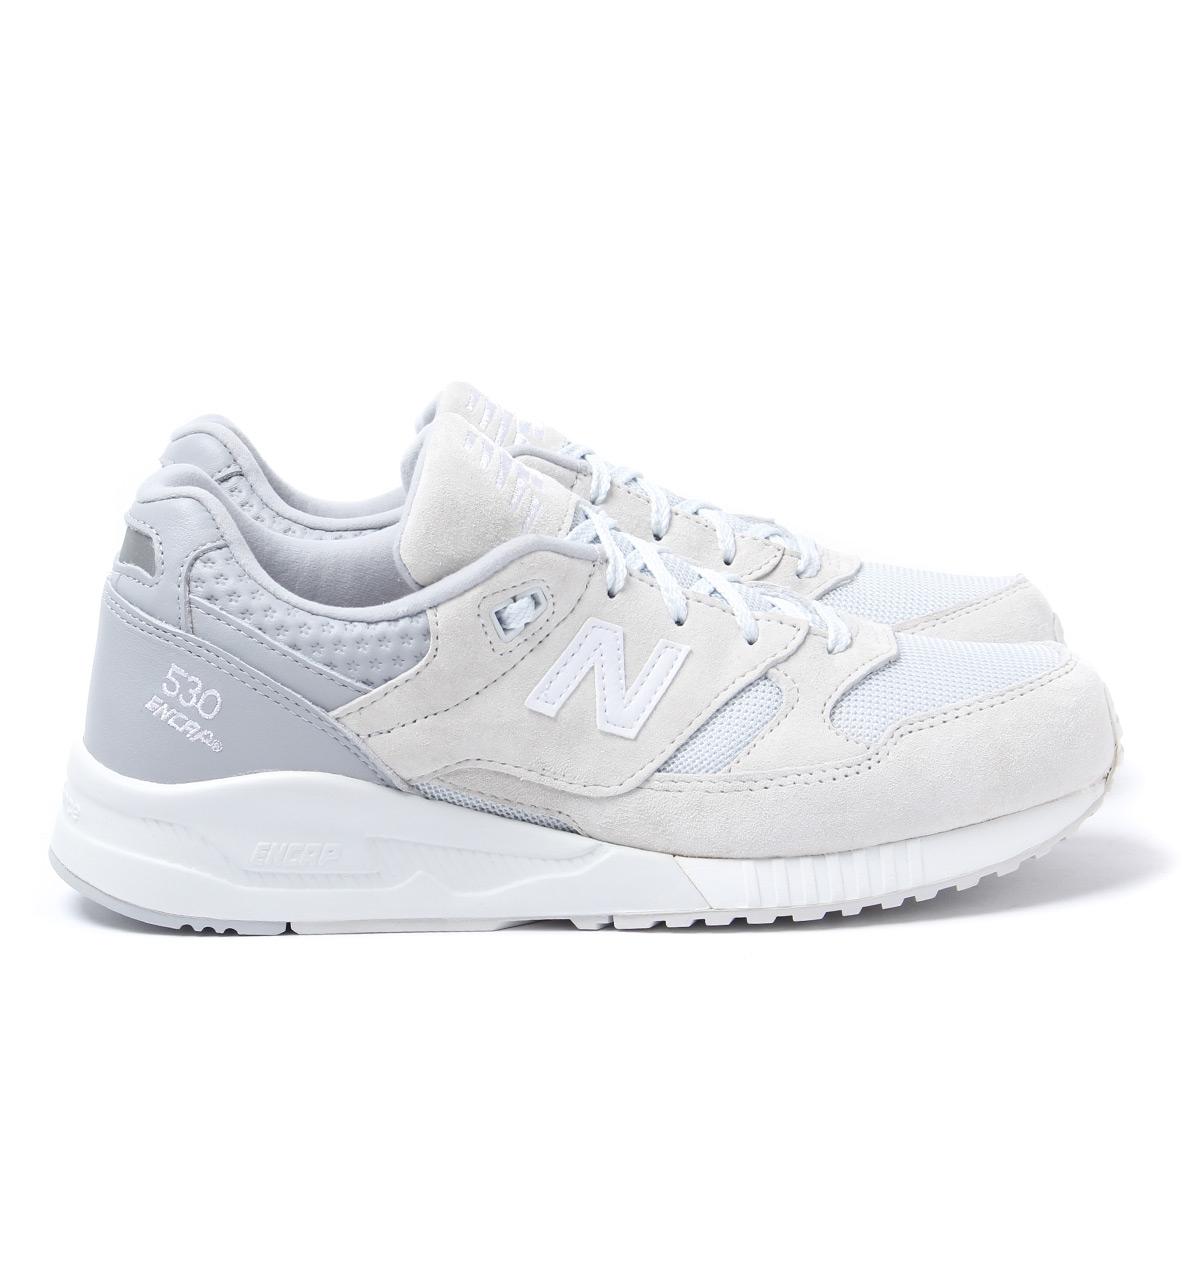 New Balance 530 Cream Suede Trainers | Lyst